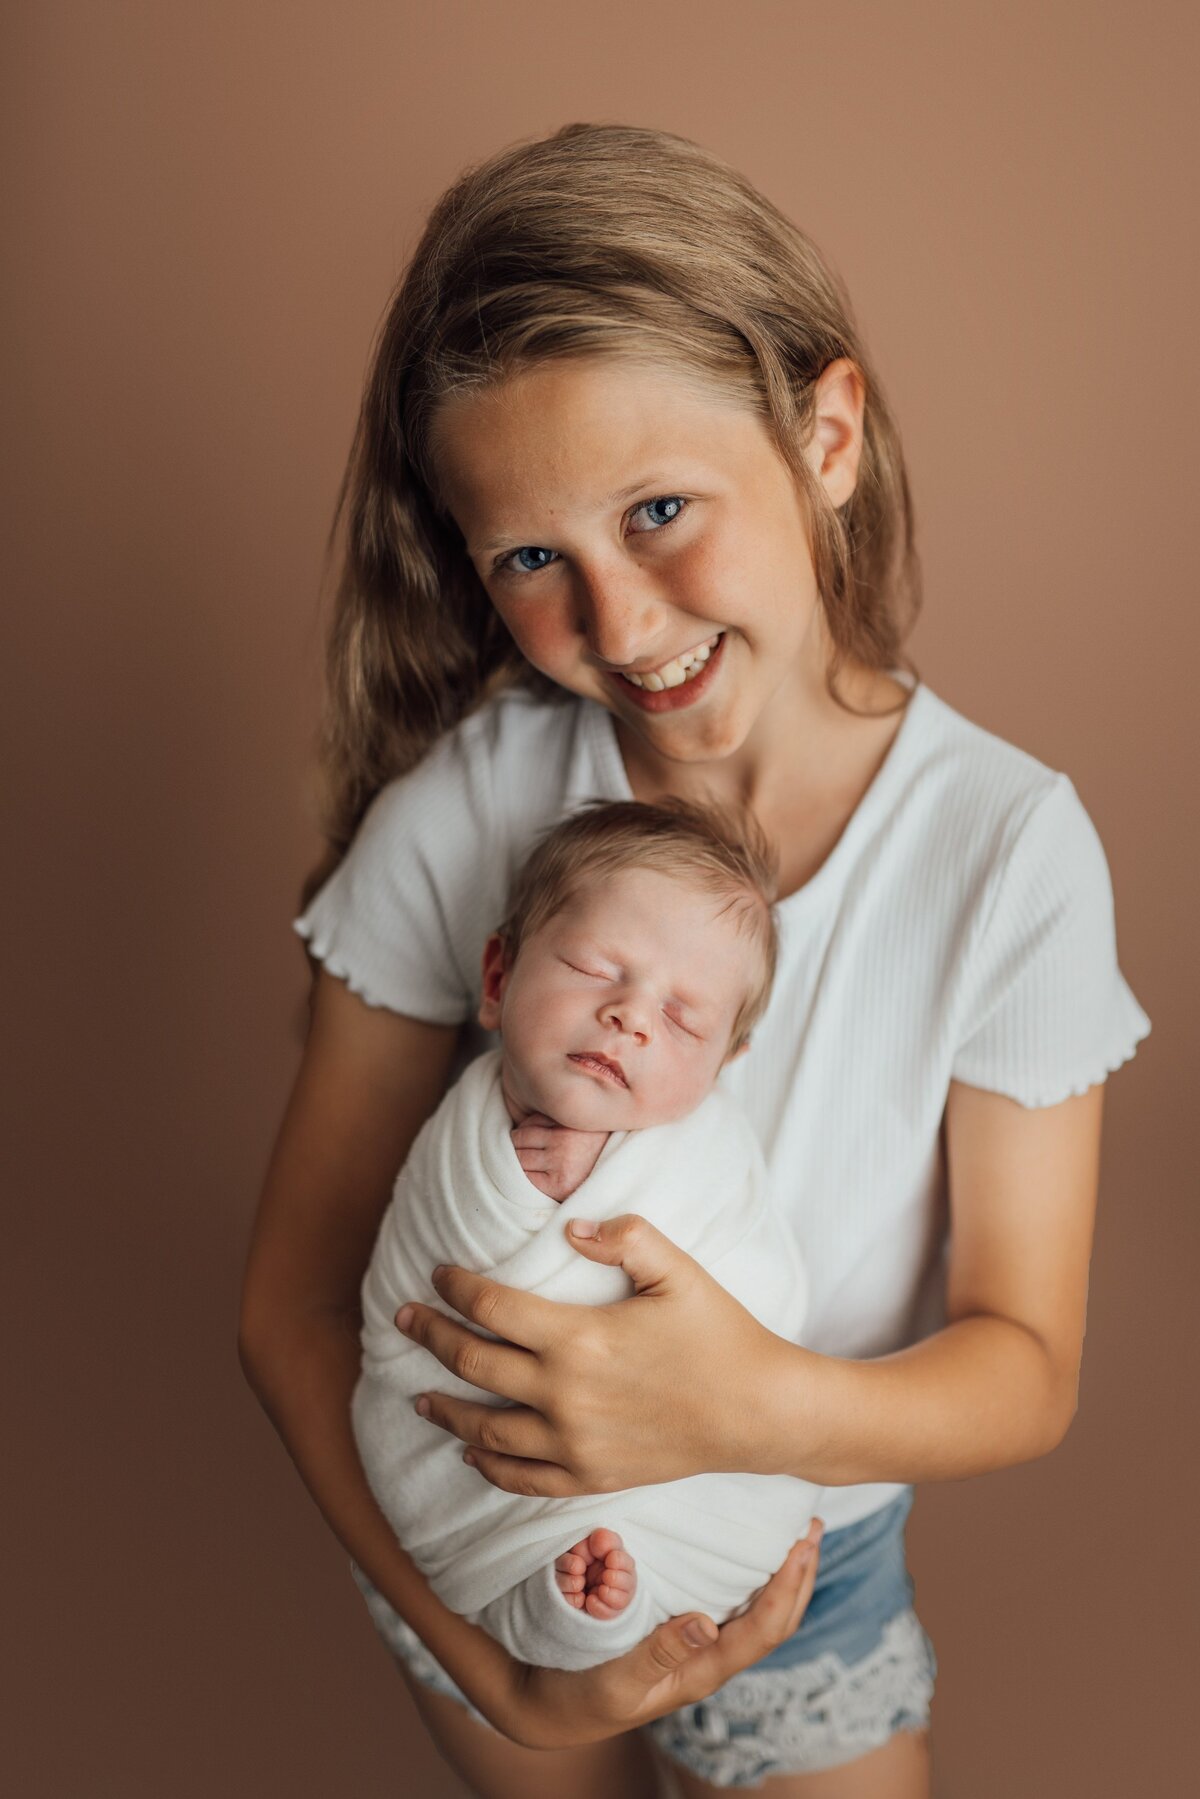 big sister and baby durin gnewborn session in st. pete